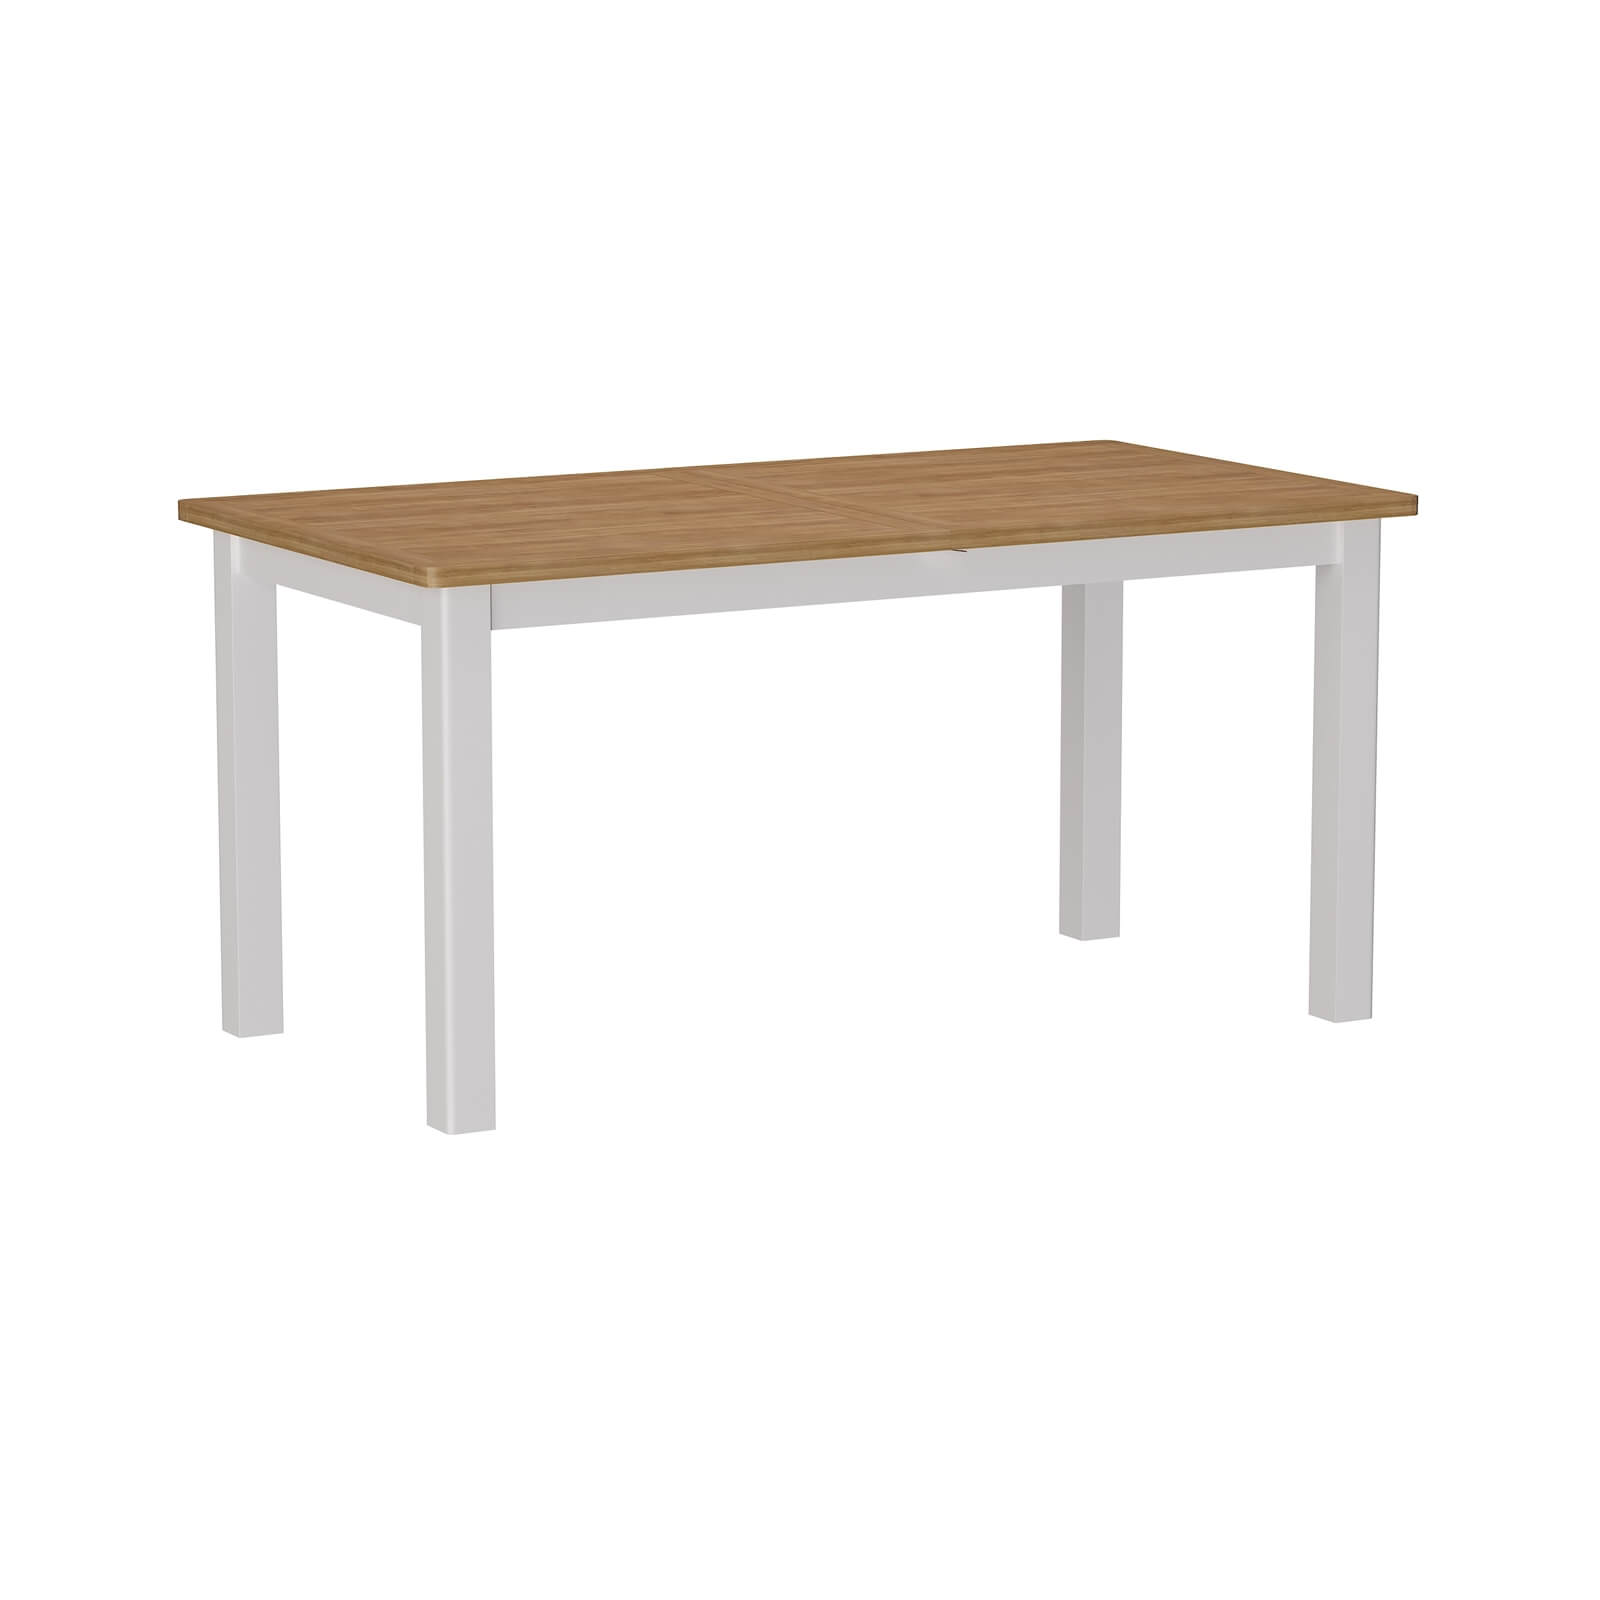 Padstow 1.6m Extending Dining Table - Truffle